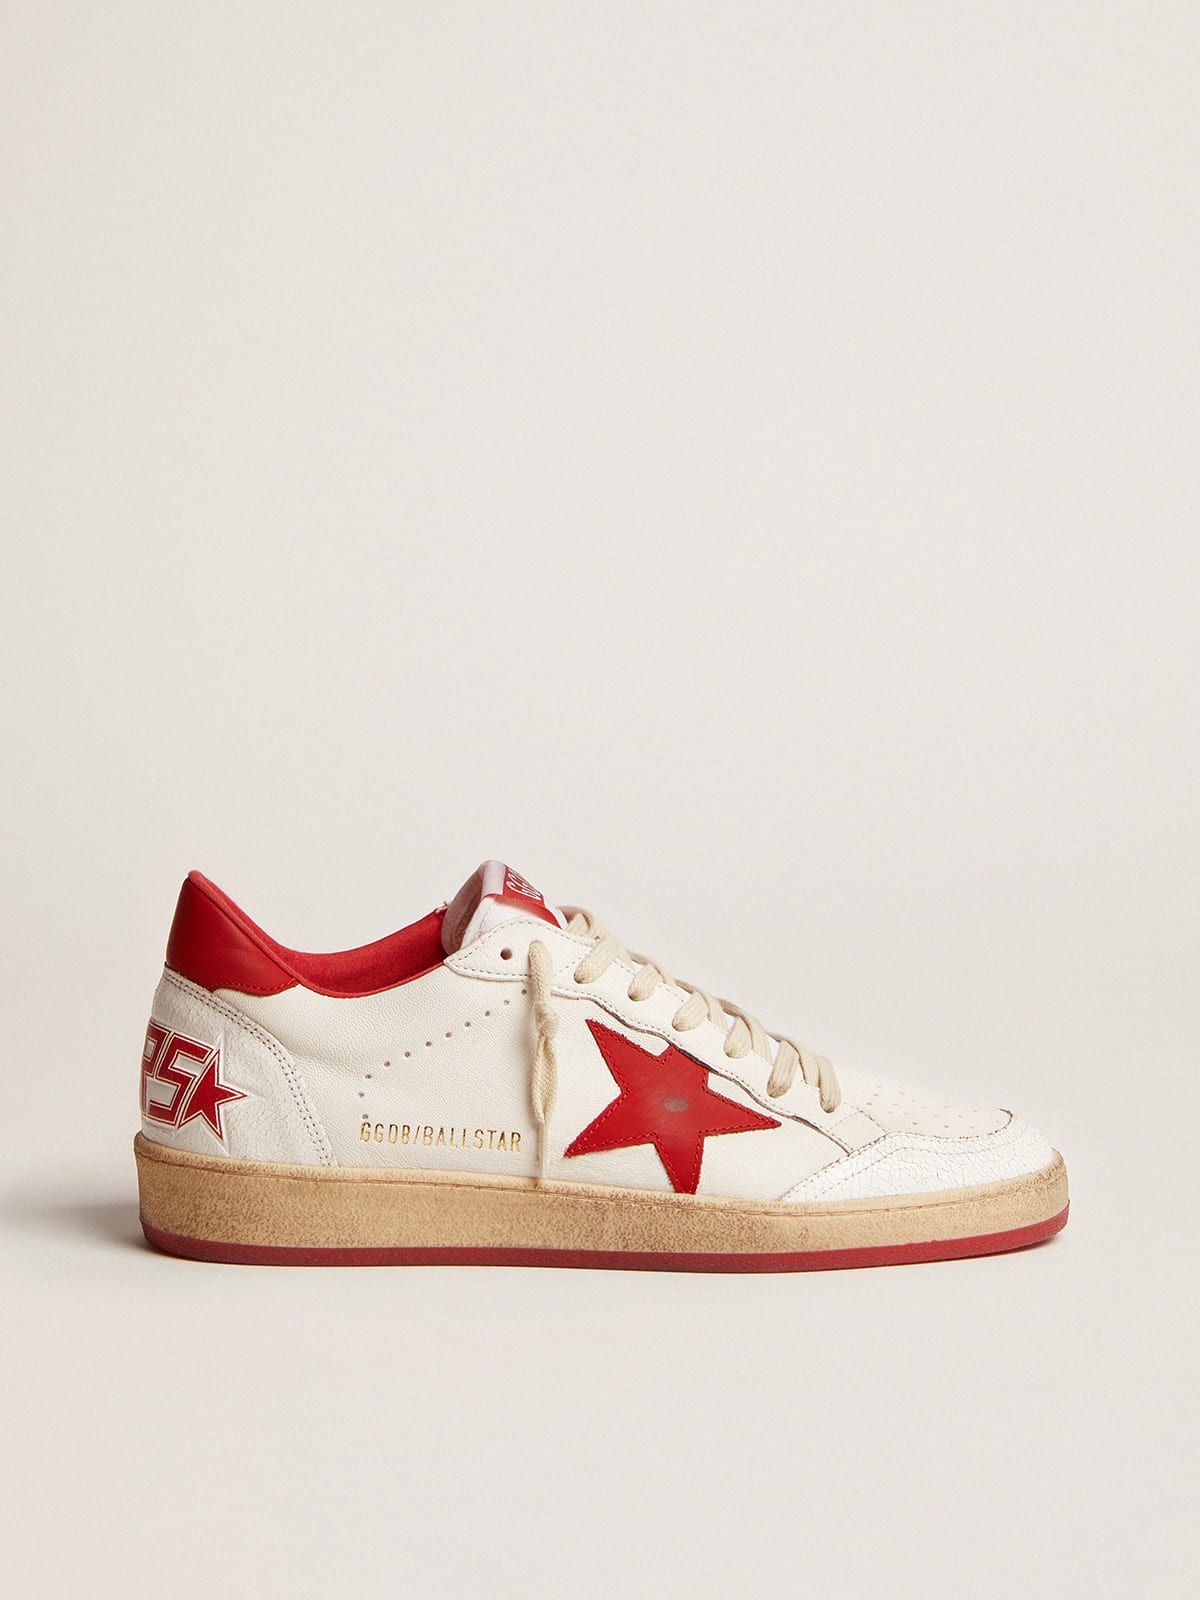 Golden Goose - Women's Ball Star in white leather with red star and heel tab in 